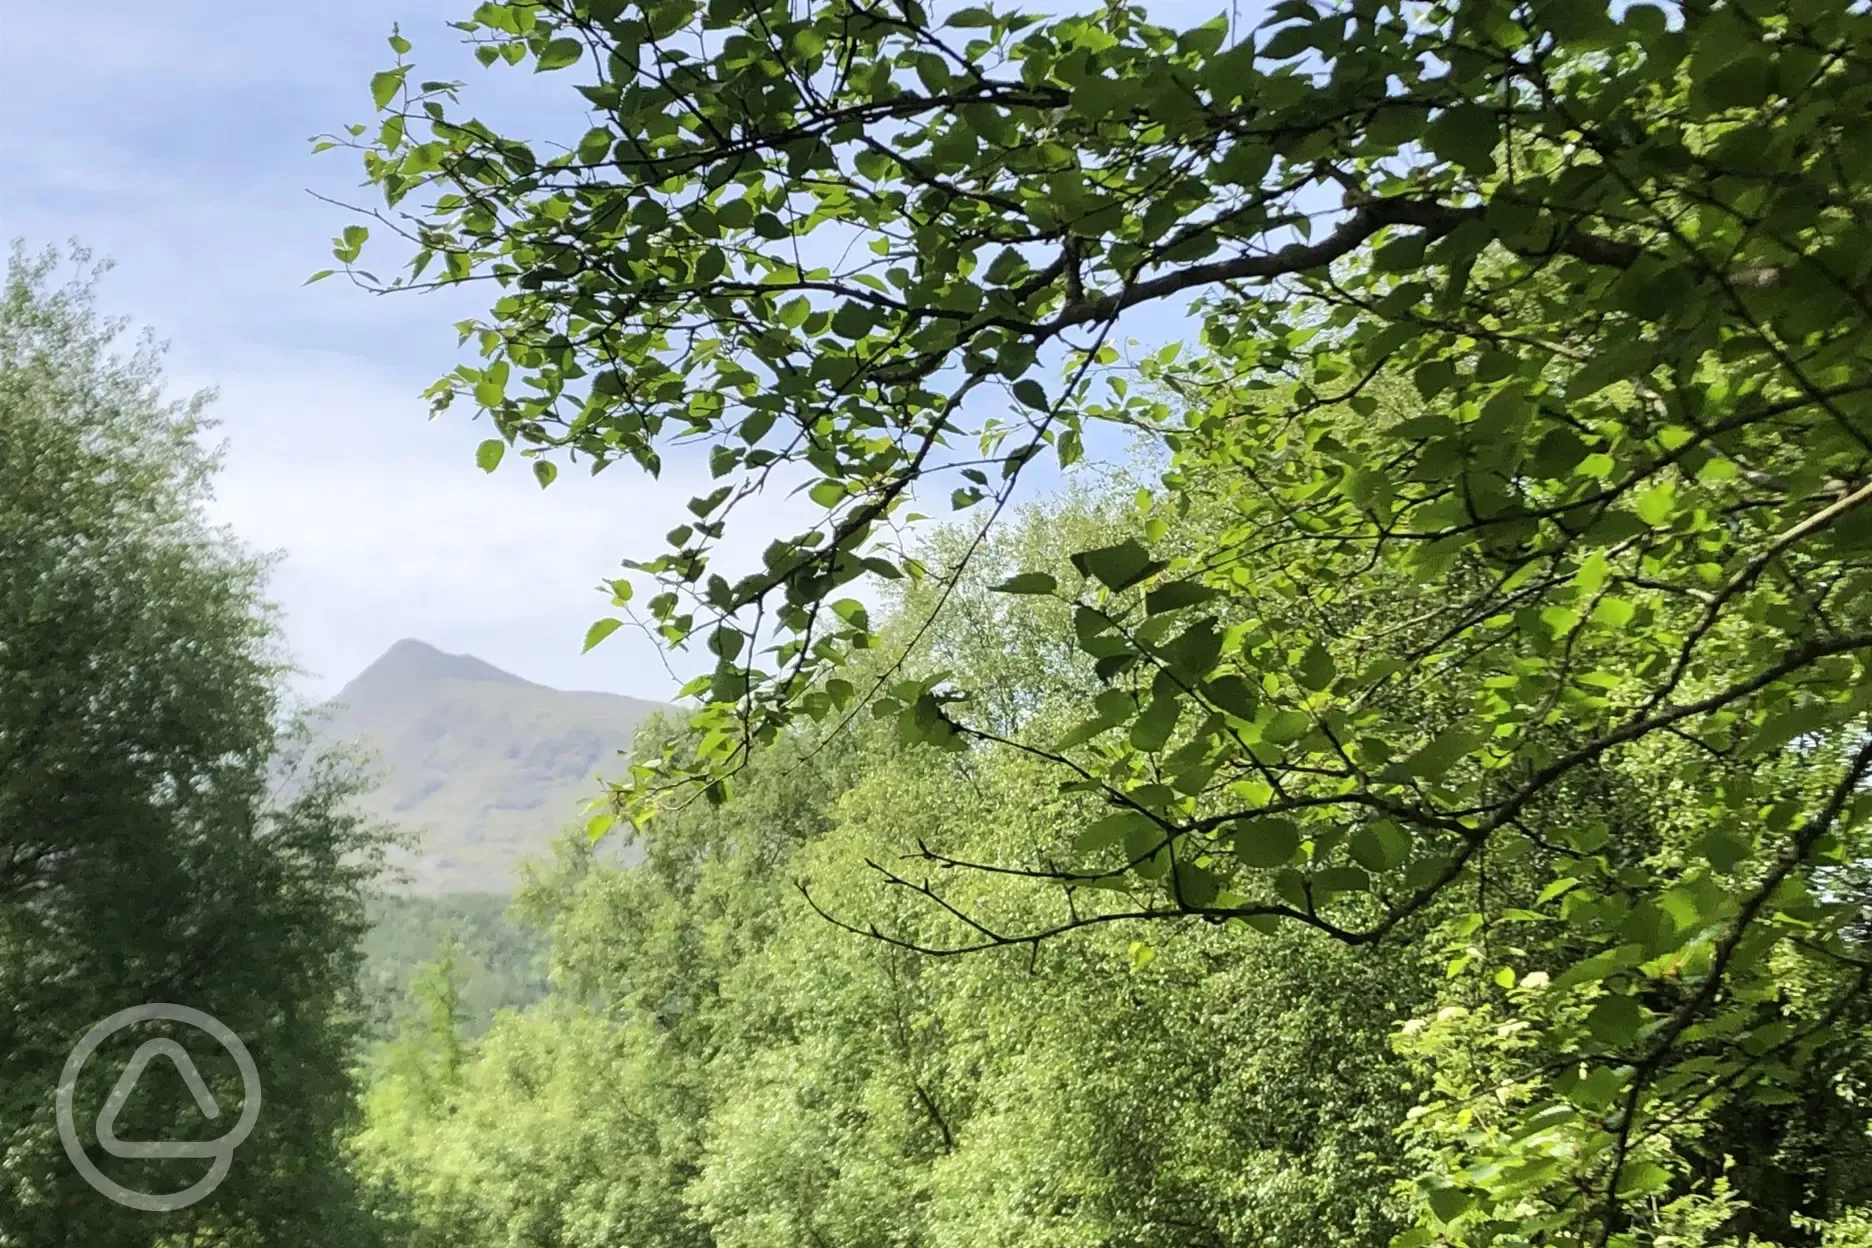 Moel Siabod can be climbed via footpaths from the campsite 